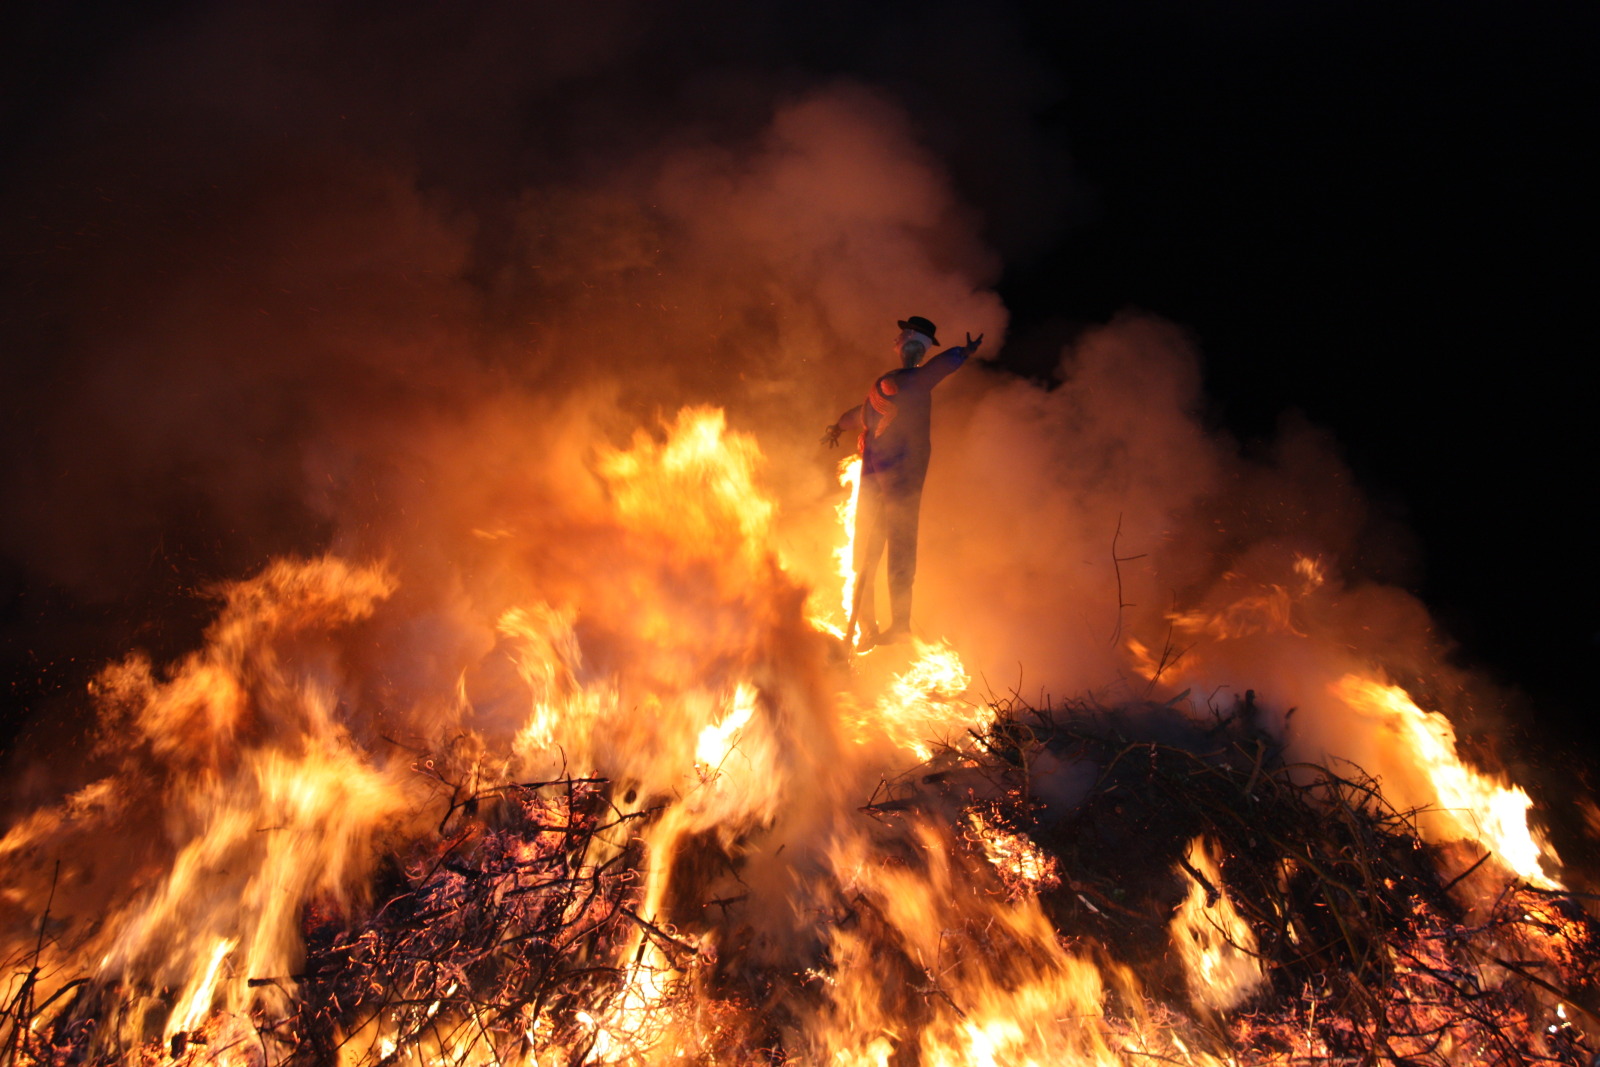 Photo of the bonfire in flames